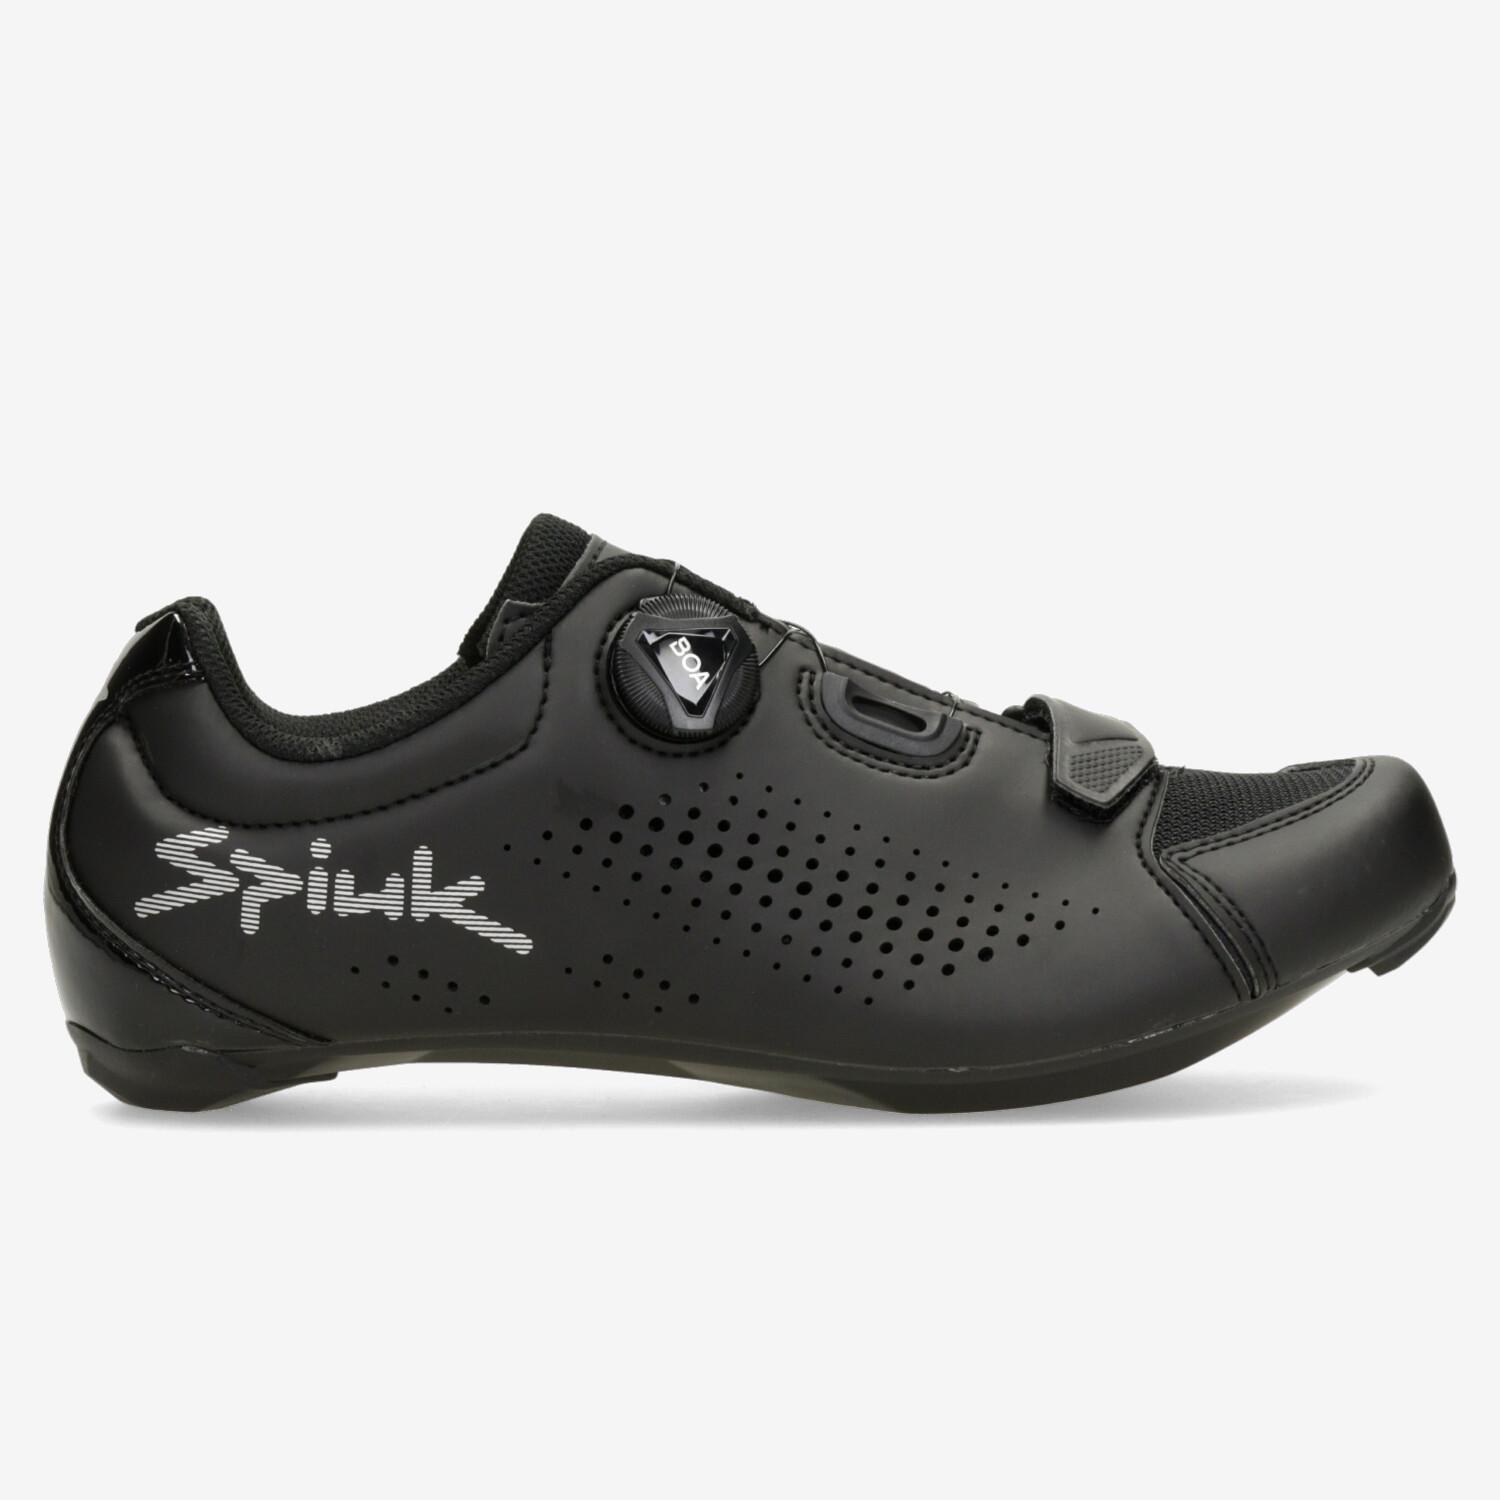 Spiuk Caray - Noir - Chaussures Cyclisme Homme sports taille 45